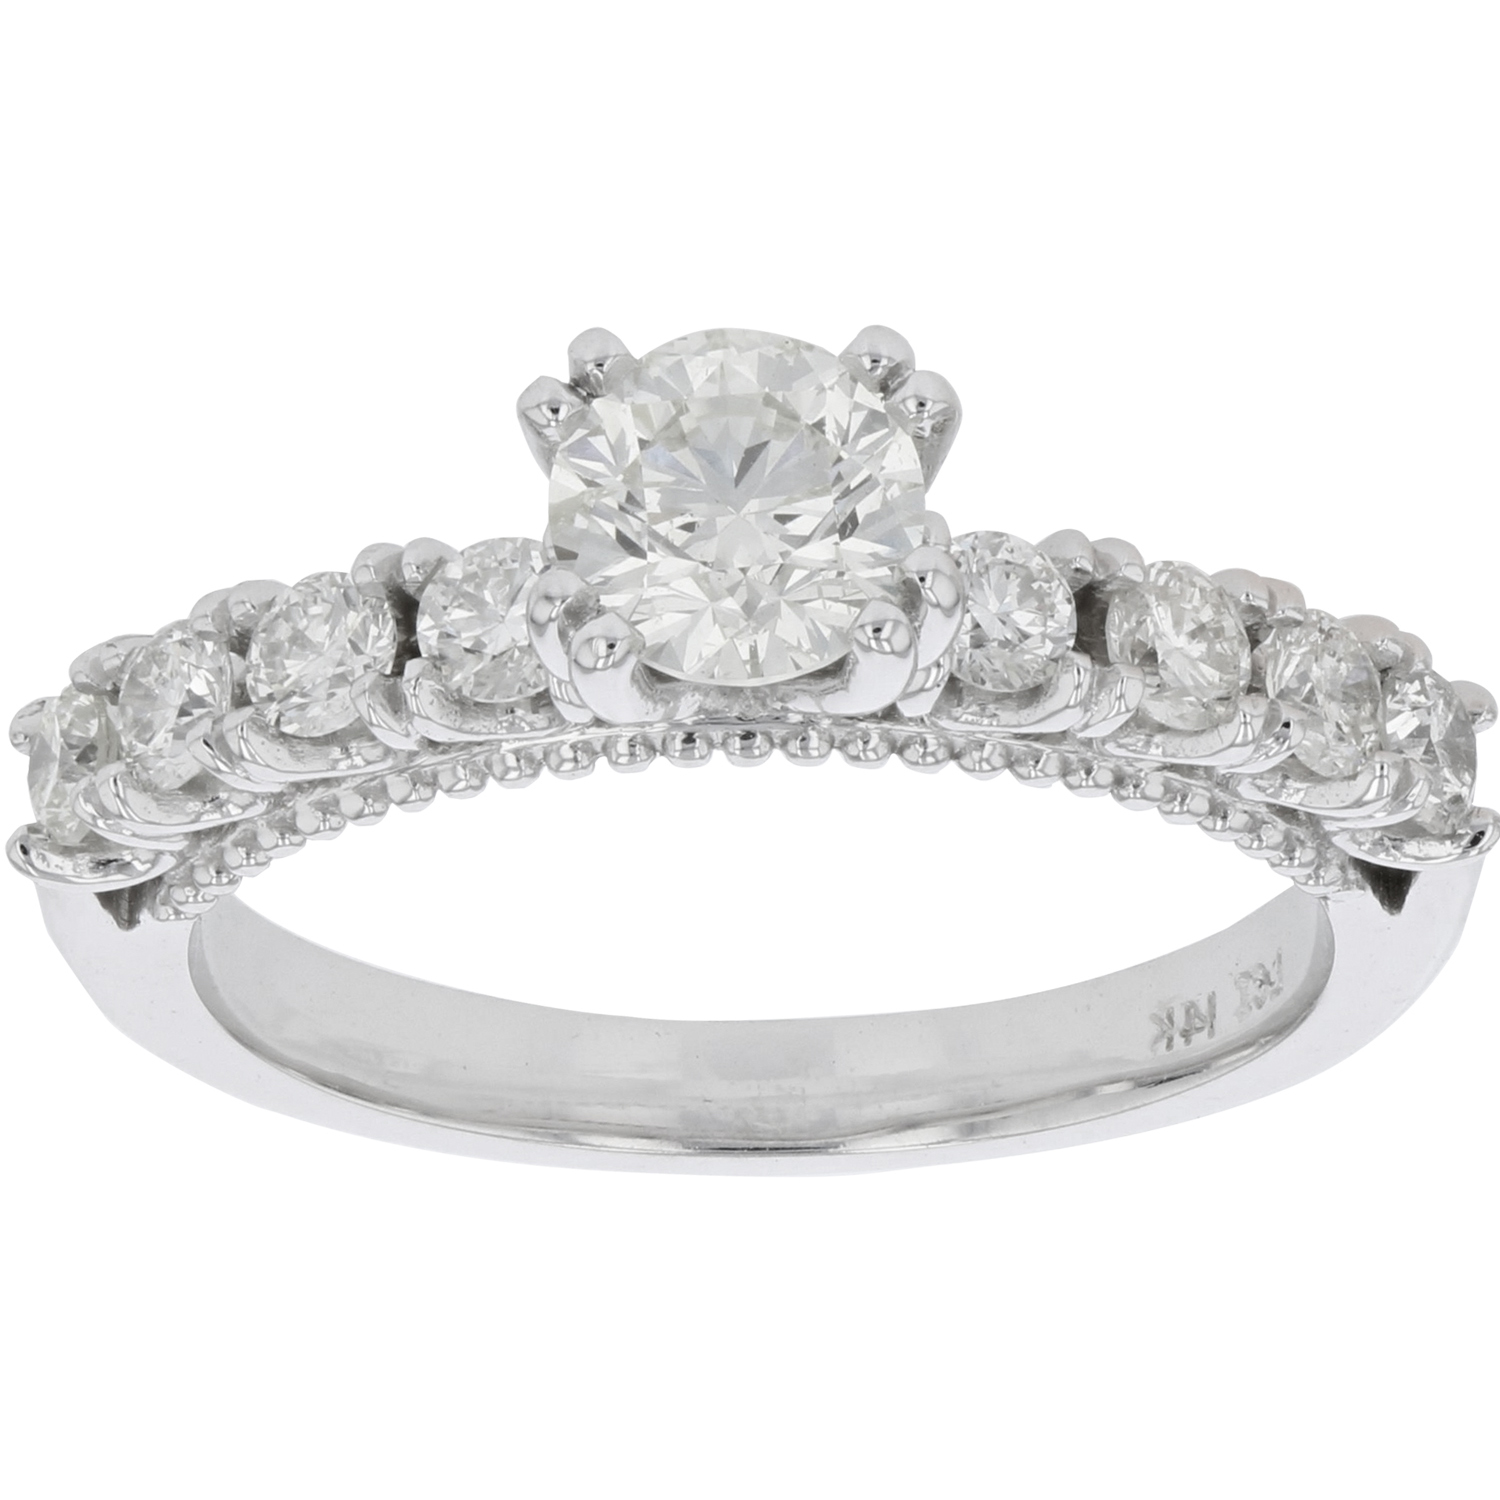 1.25xtw Duamond Engagement Ring in 14k White Gold